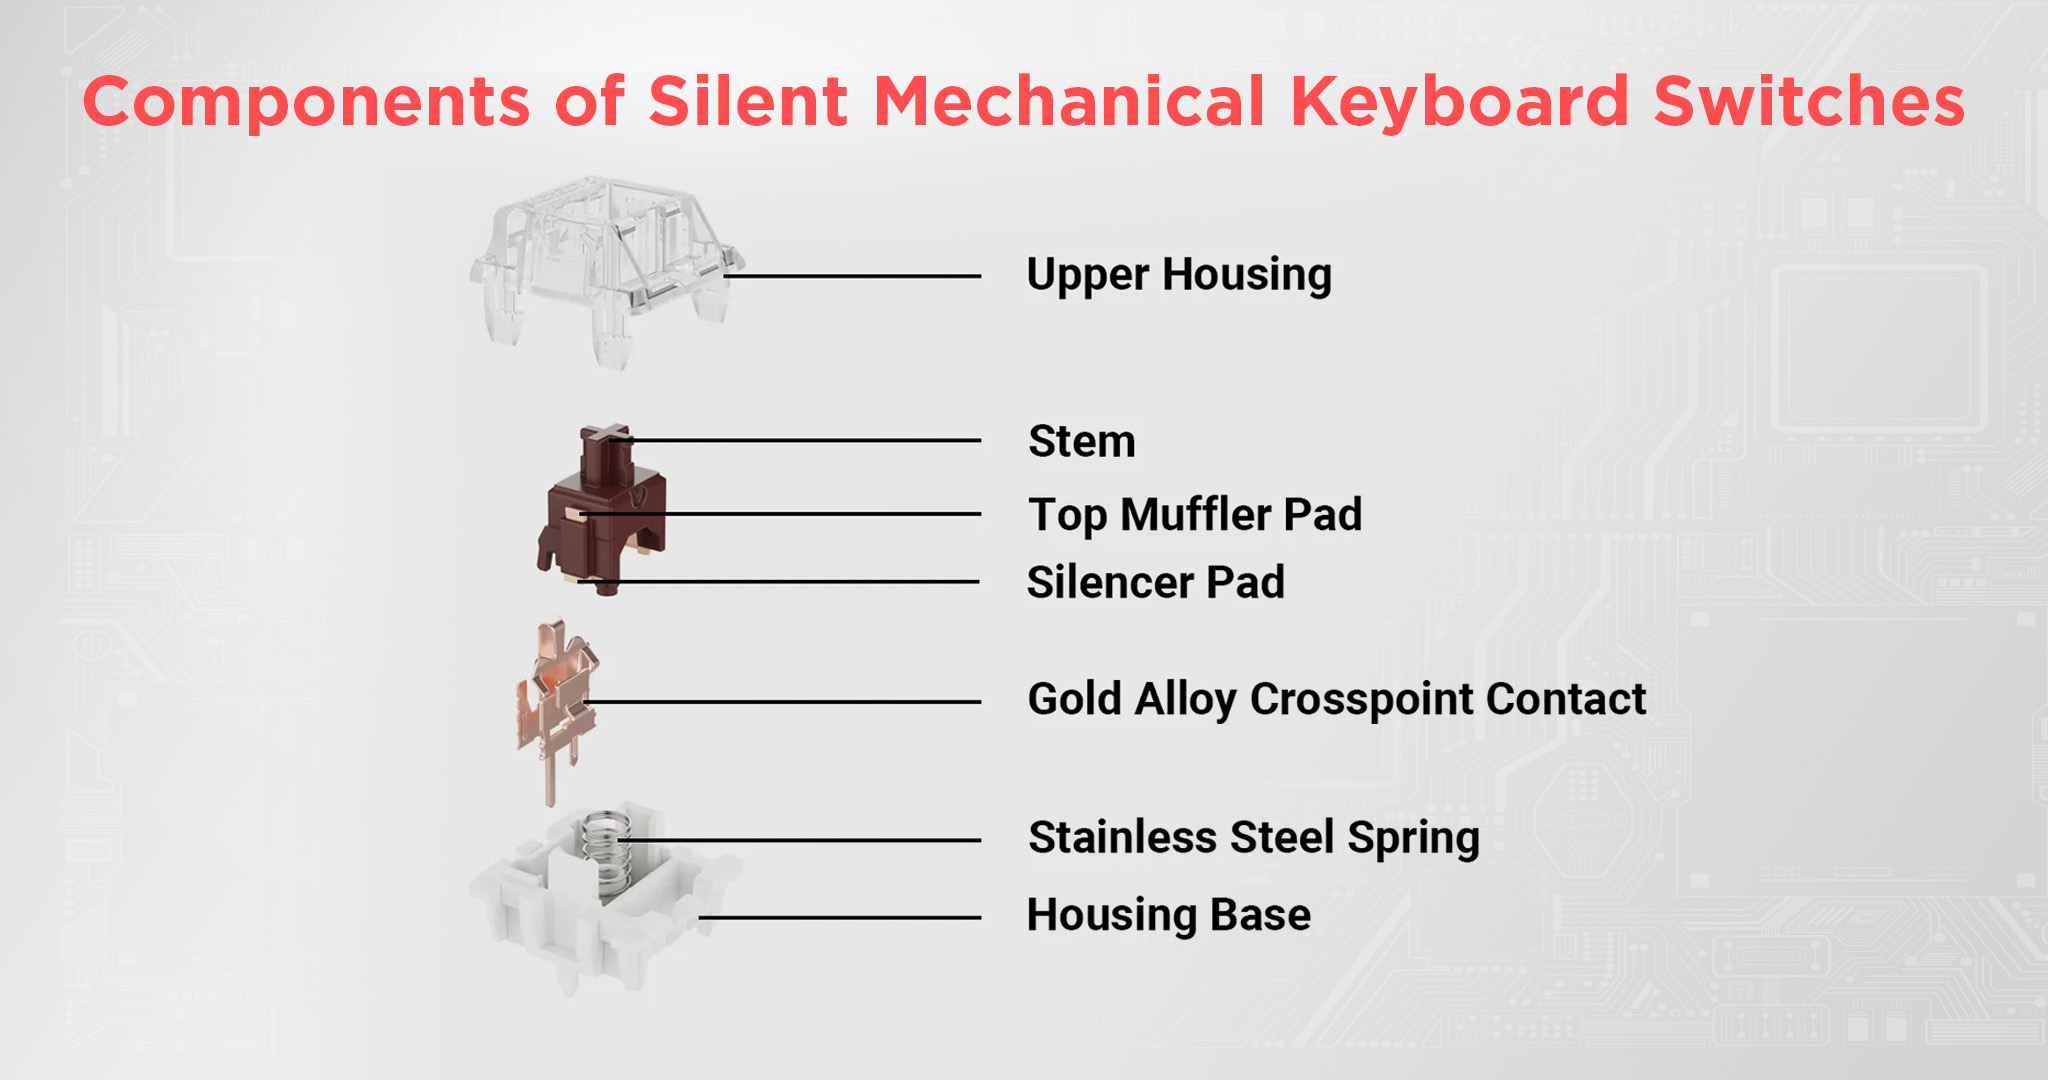 Components of Silent Mechanical Keyboard Switches